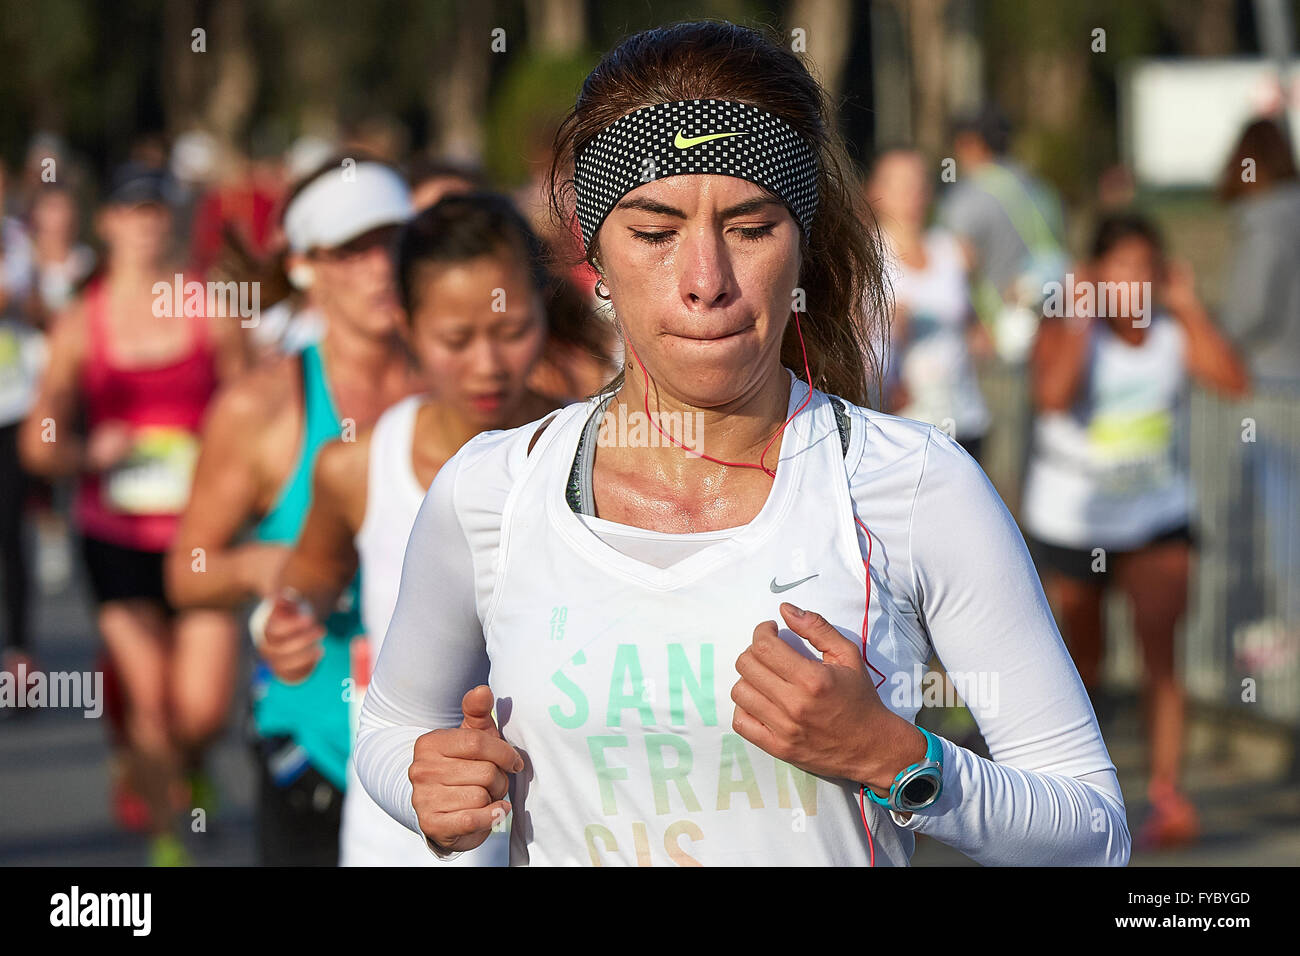 Concentration Showing On A Female Athlete Running In The Nike Woman's Half Marathon, San Francisco, 2015. Stock Photo